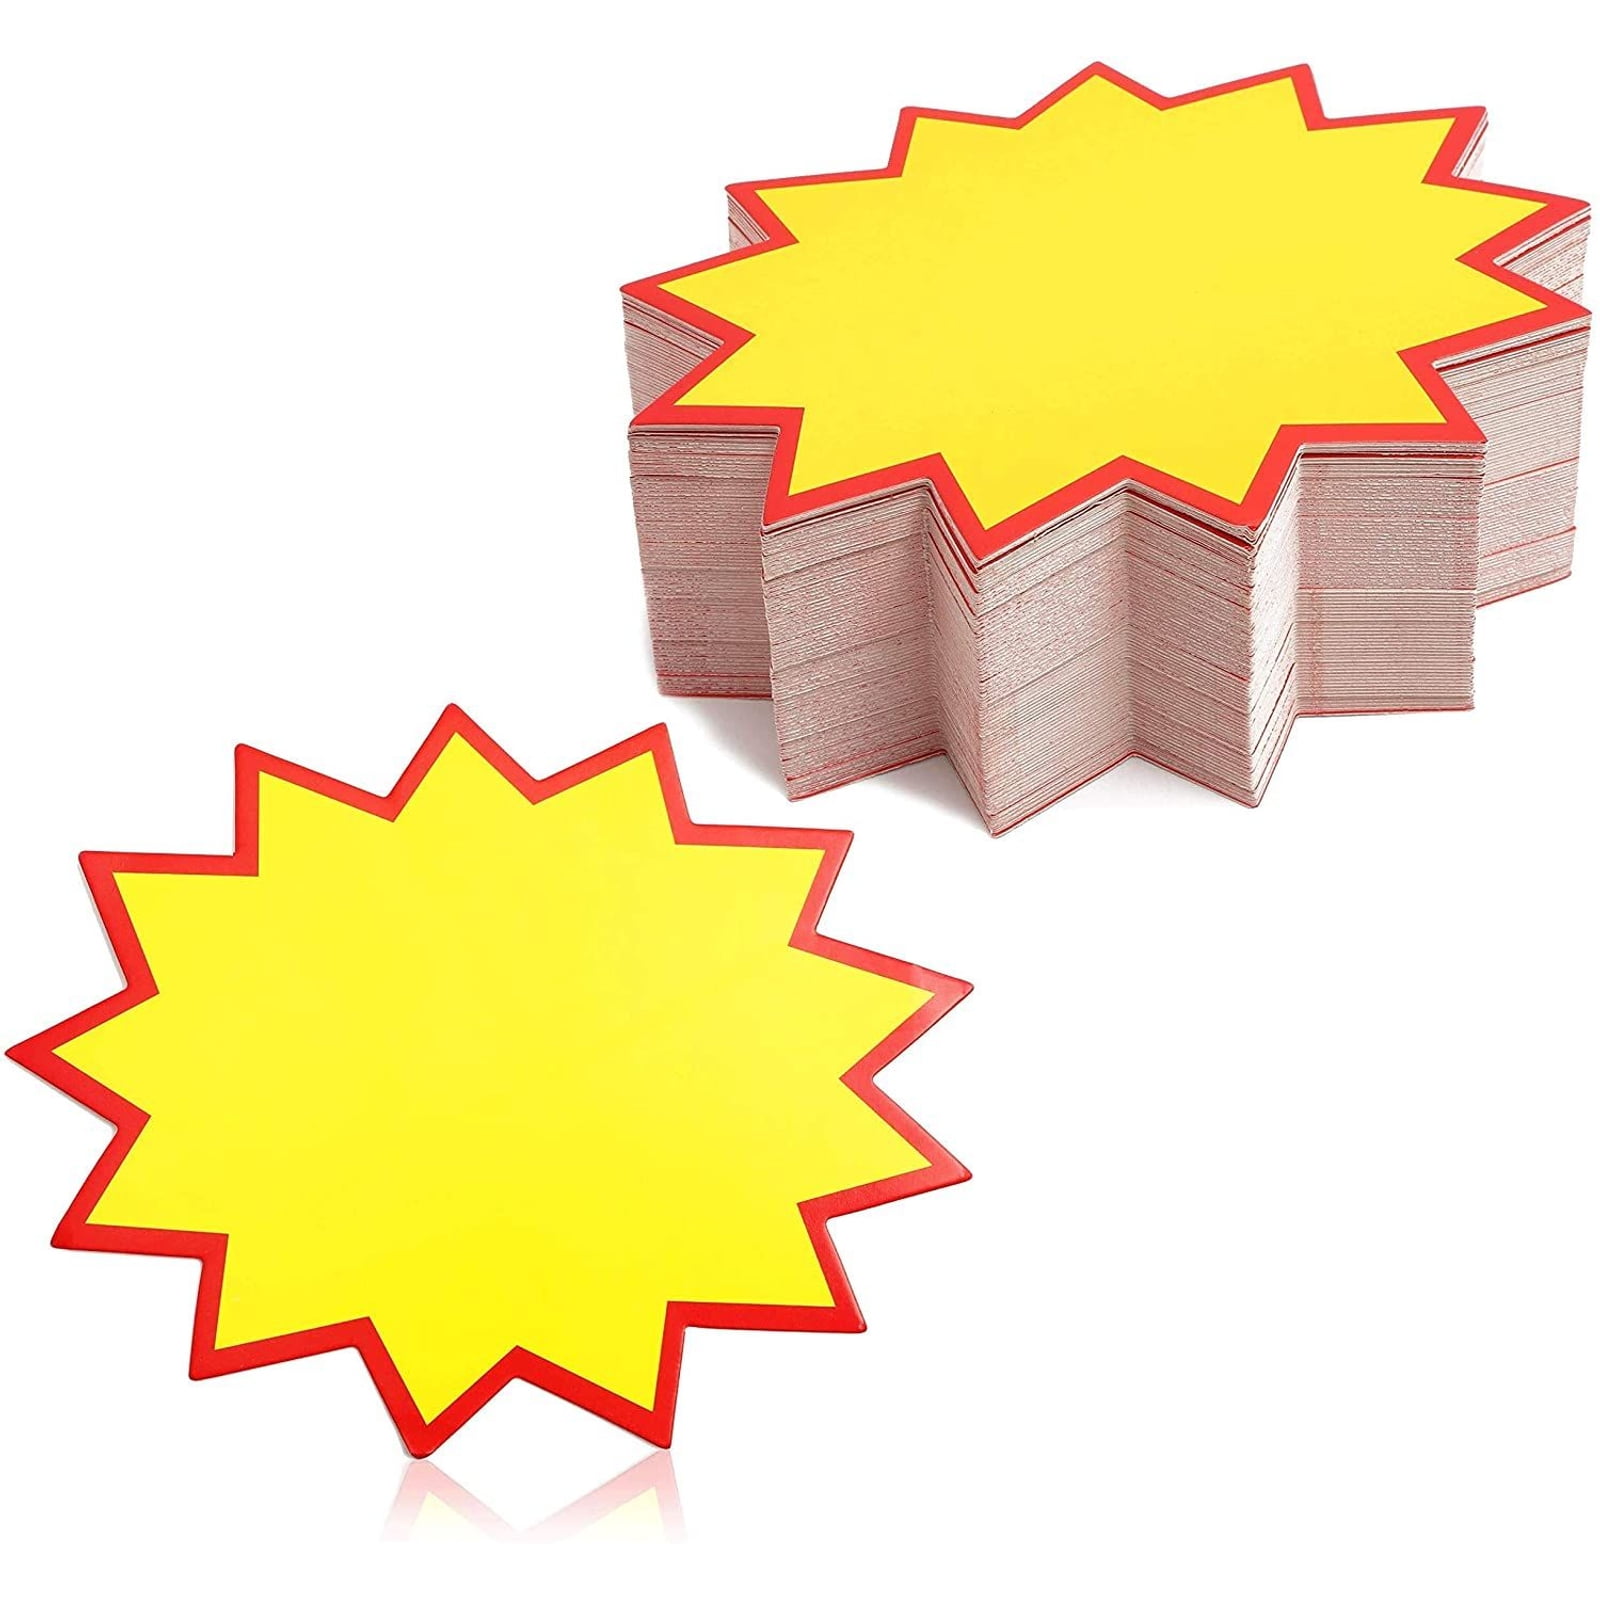 Gofypel Starburst Sign Cards Sale Paper Signs Price Burst Signs Blank Star Retail Sale Labels Sales Price Tags for Retail Store Real Estate Supermarket Stores 90 Pcs Fundraising Garage Sales